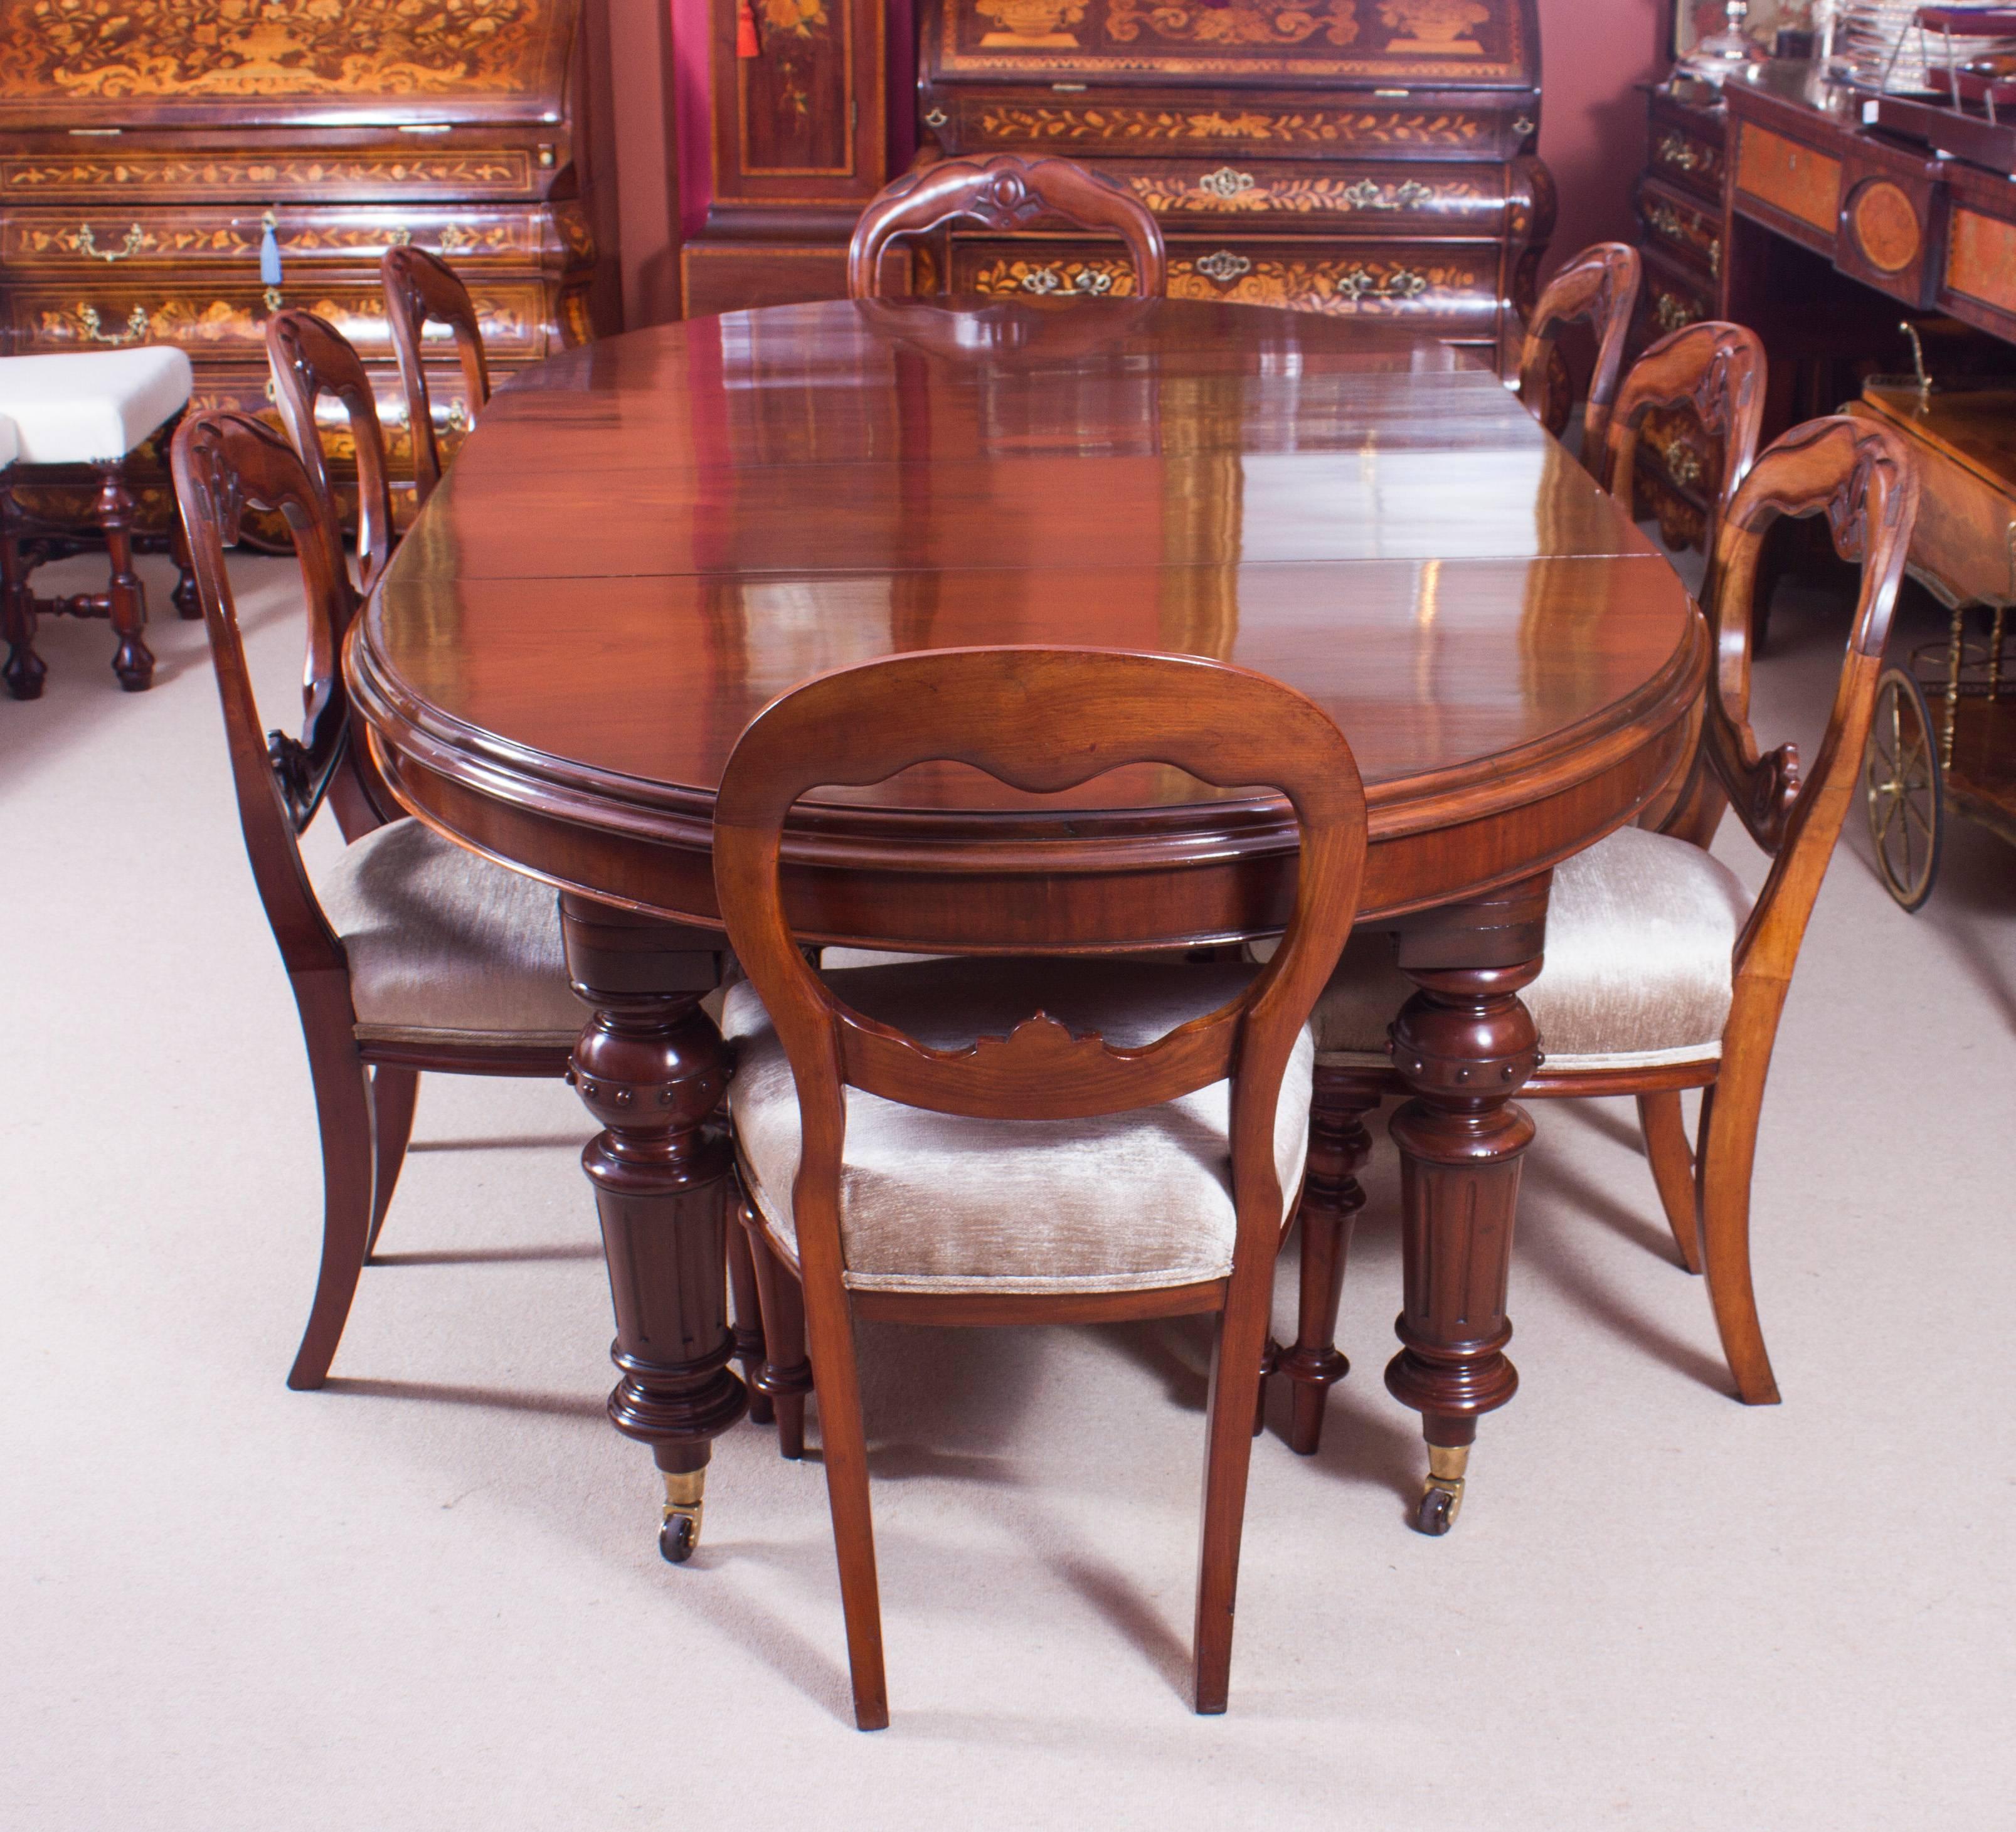 This is a magnificent antique Victorian oval solid mahogany extending dining table, circa 1860 in date. 

The table has two original leaves, can comfortably seat eight and has been handcrafted from solid mahogany which has a beautiful grain and